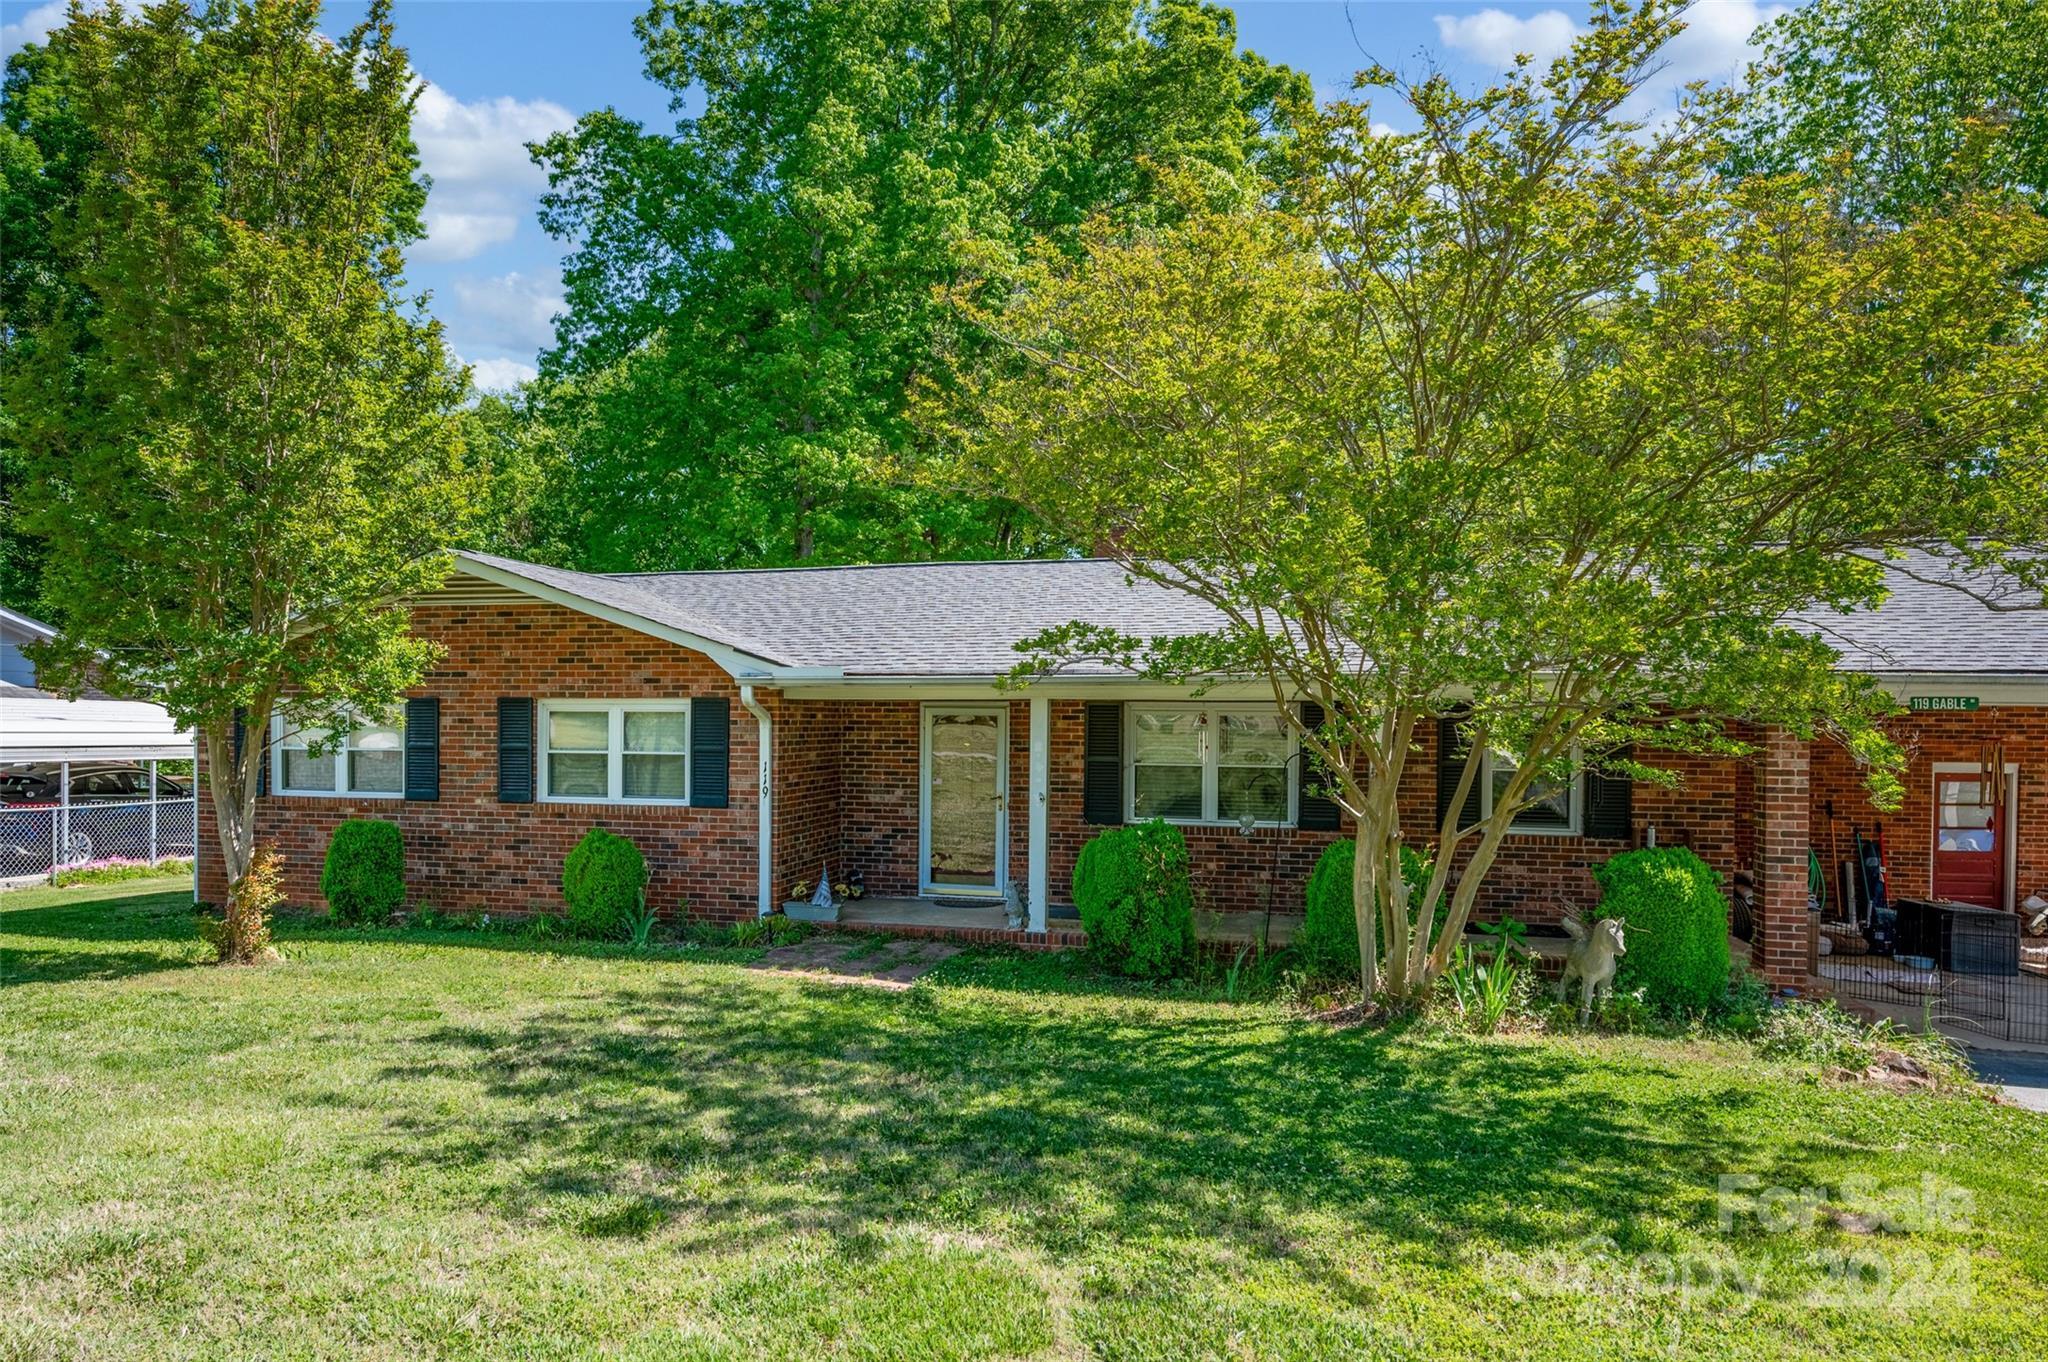 Photo one of 119 Gable Rd Mooresville NC 28115 | MLS 4128990